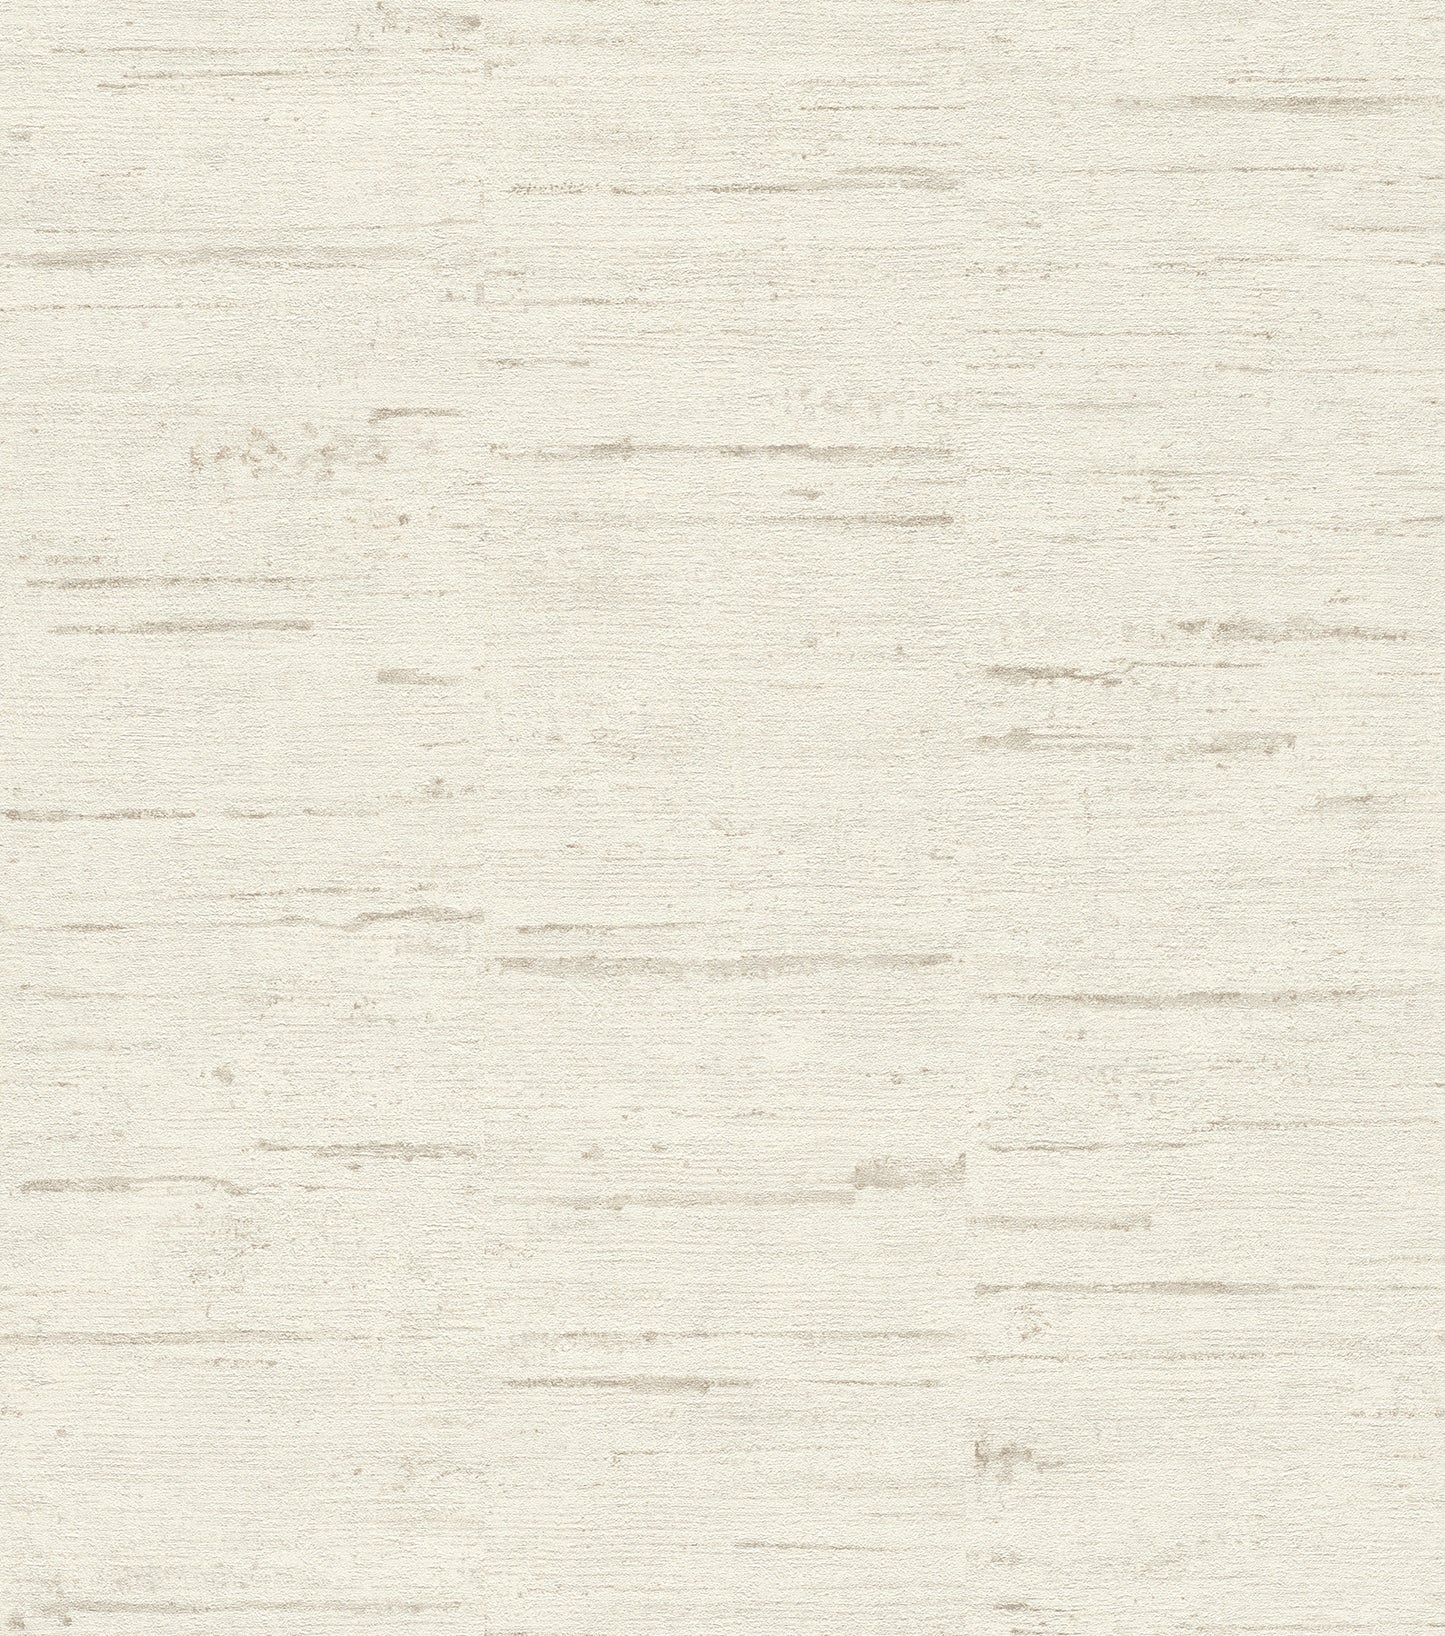 Buy 4015-426700 Beyond Textures Maclure Dove Striated Texture Dove by Advantage